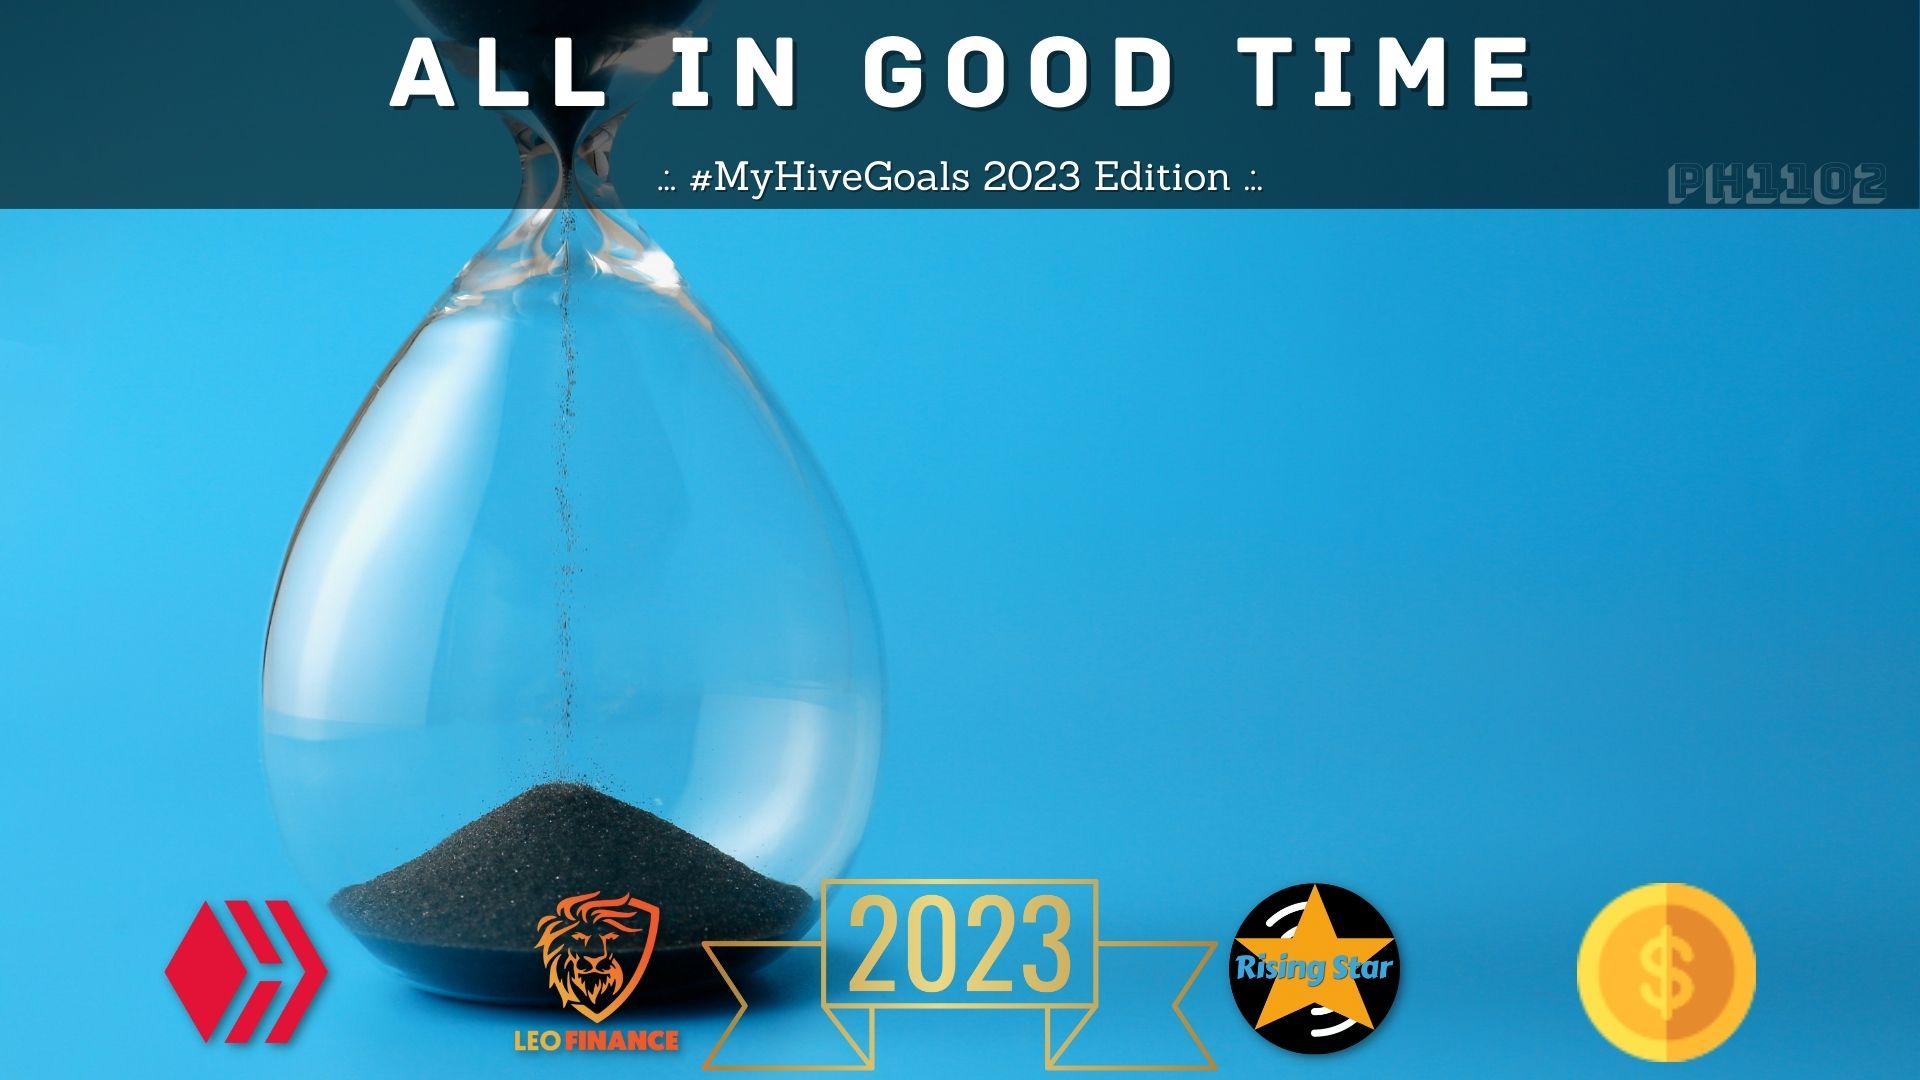 @ph1102/all-in-good-time-myhivegoals-2023